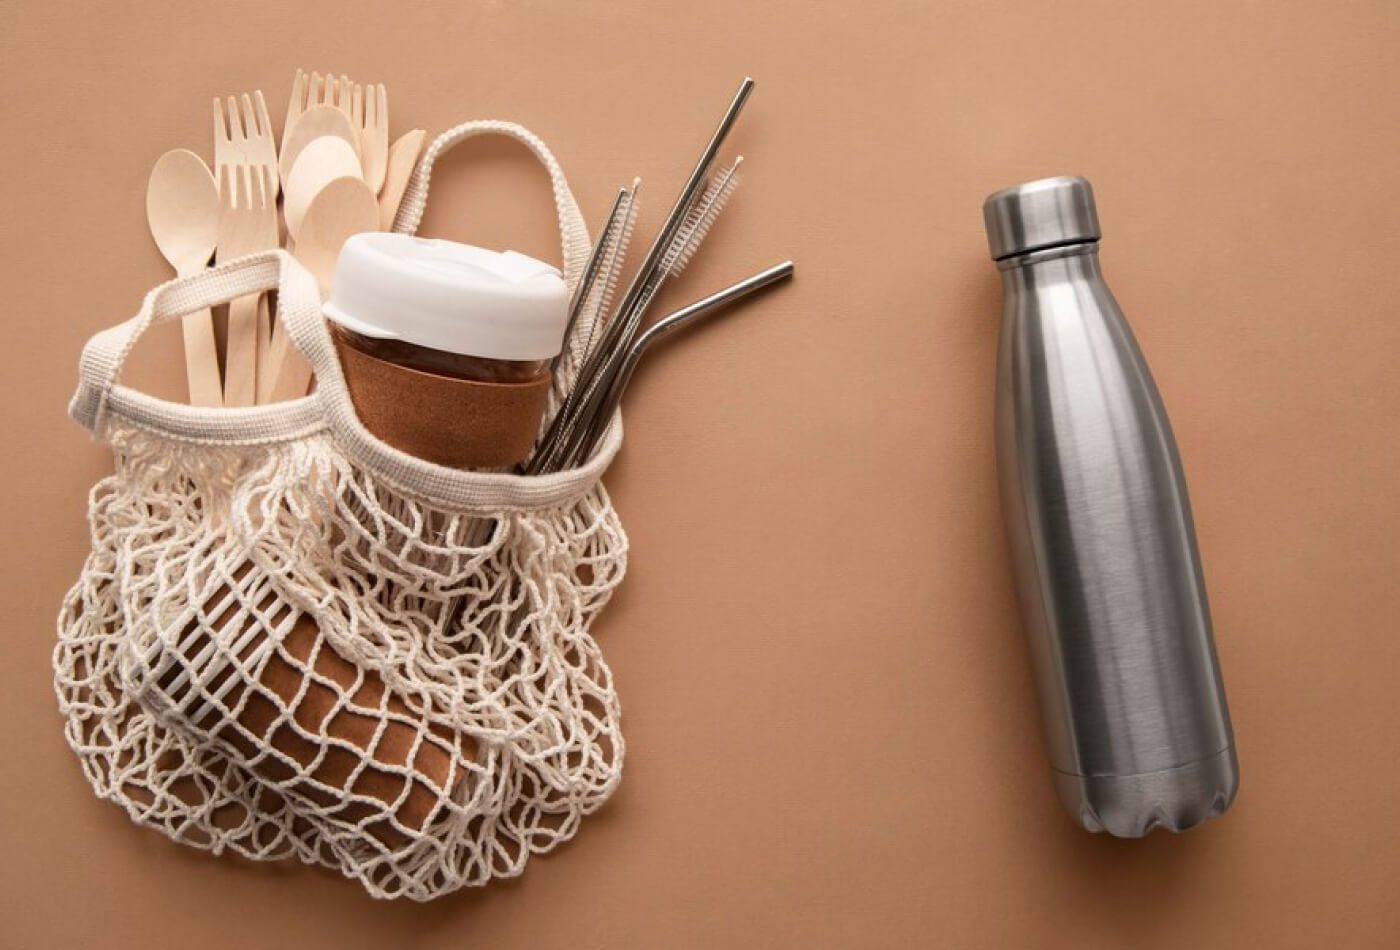 Biodegradable Items